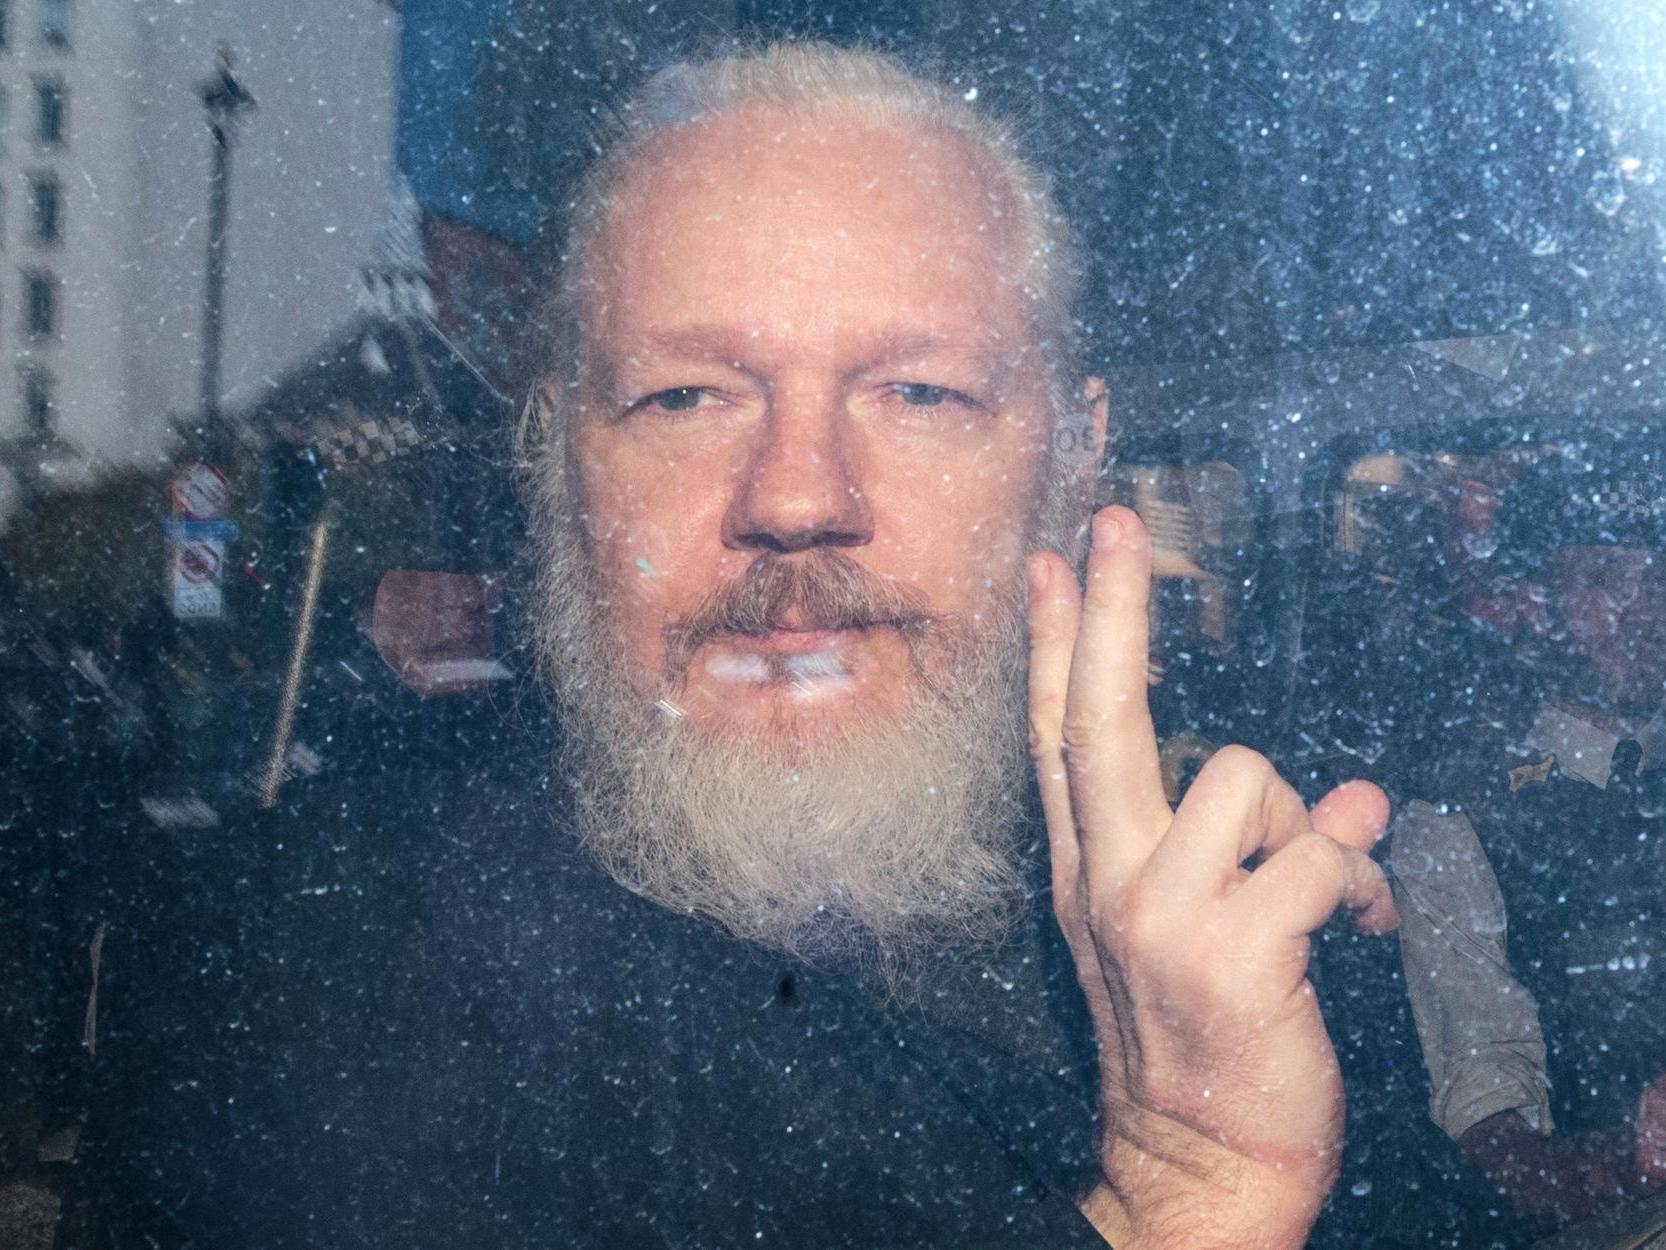 Julian Assange 'subjected to every kind of torment' in Belmarsh prison as he awaits extradition